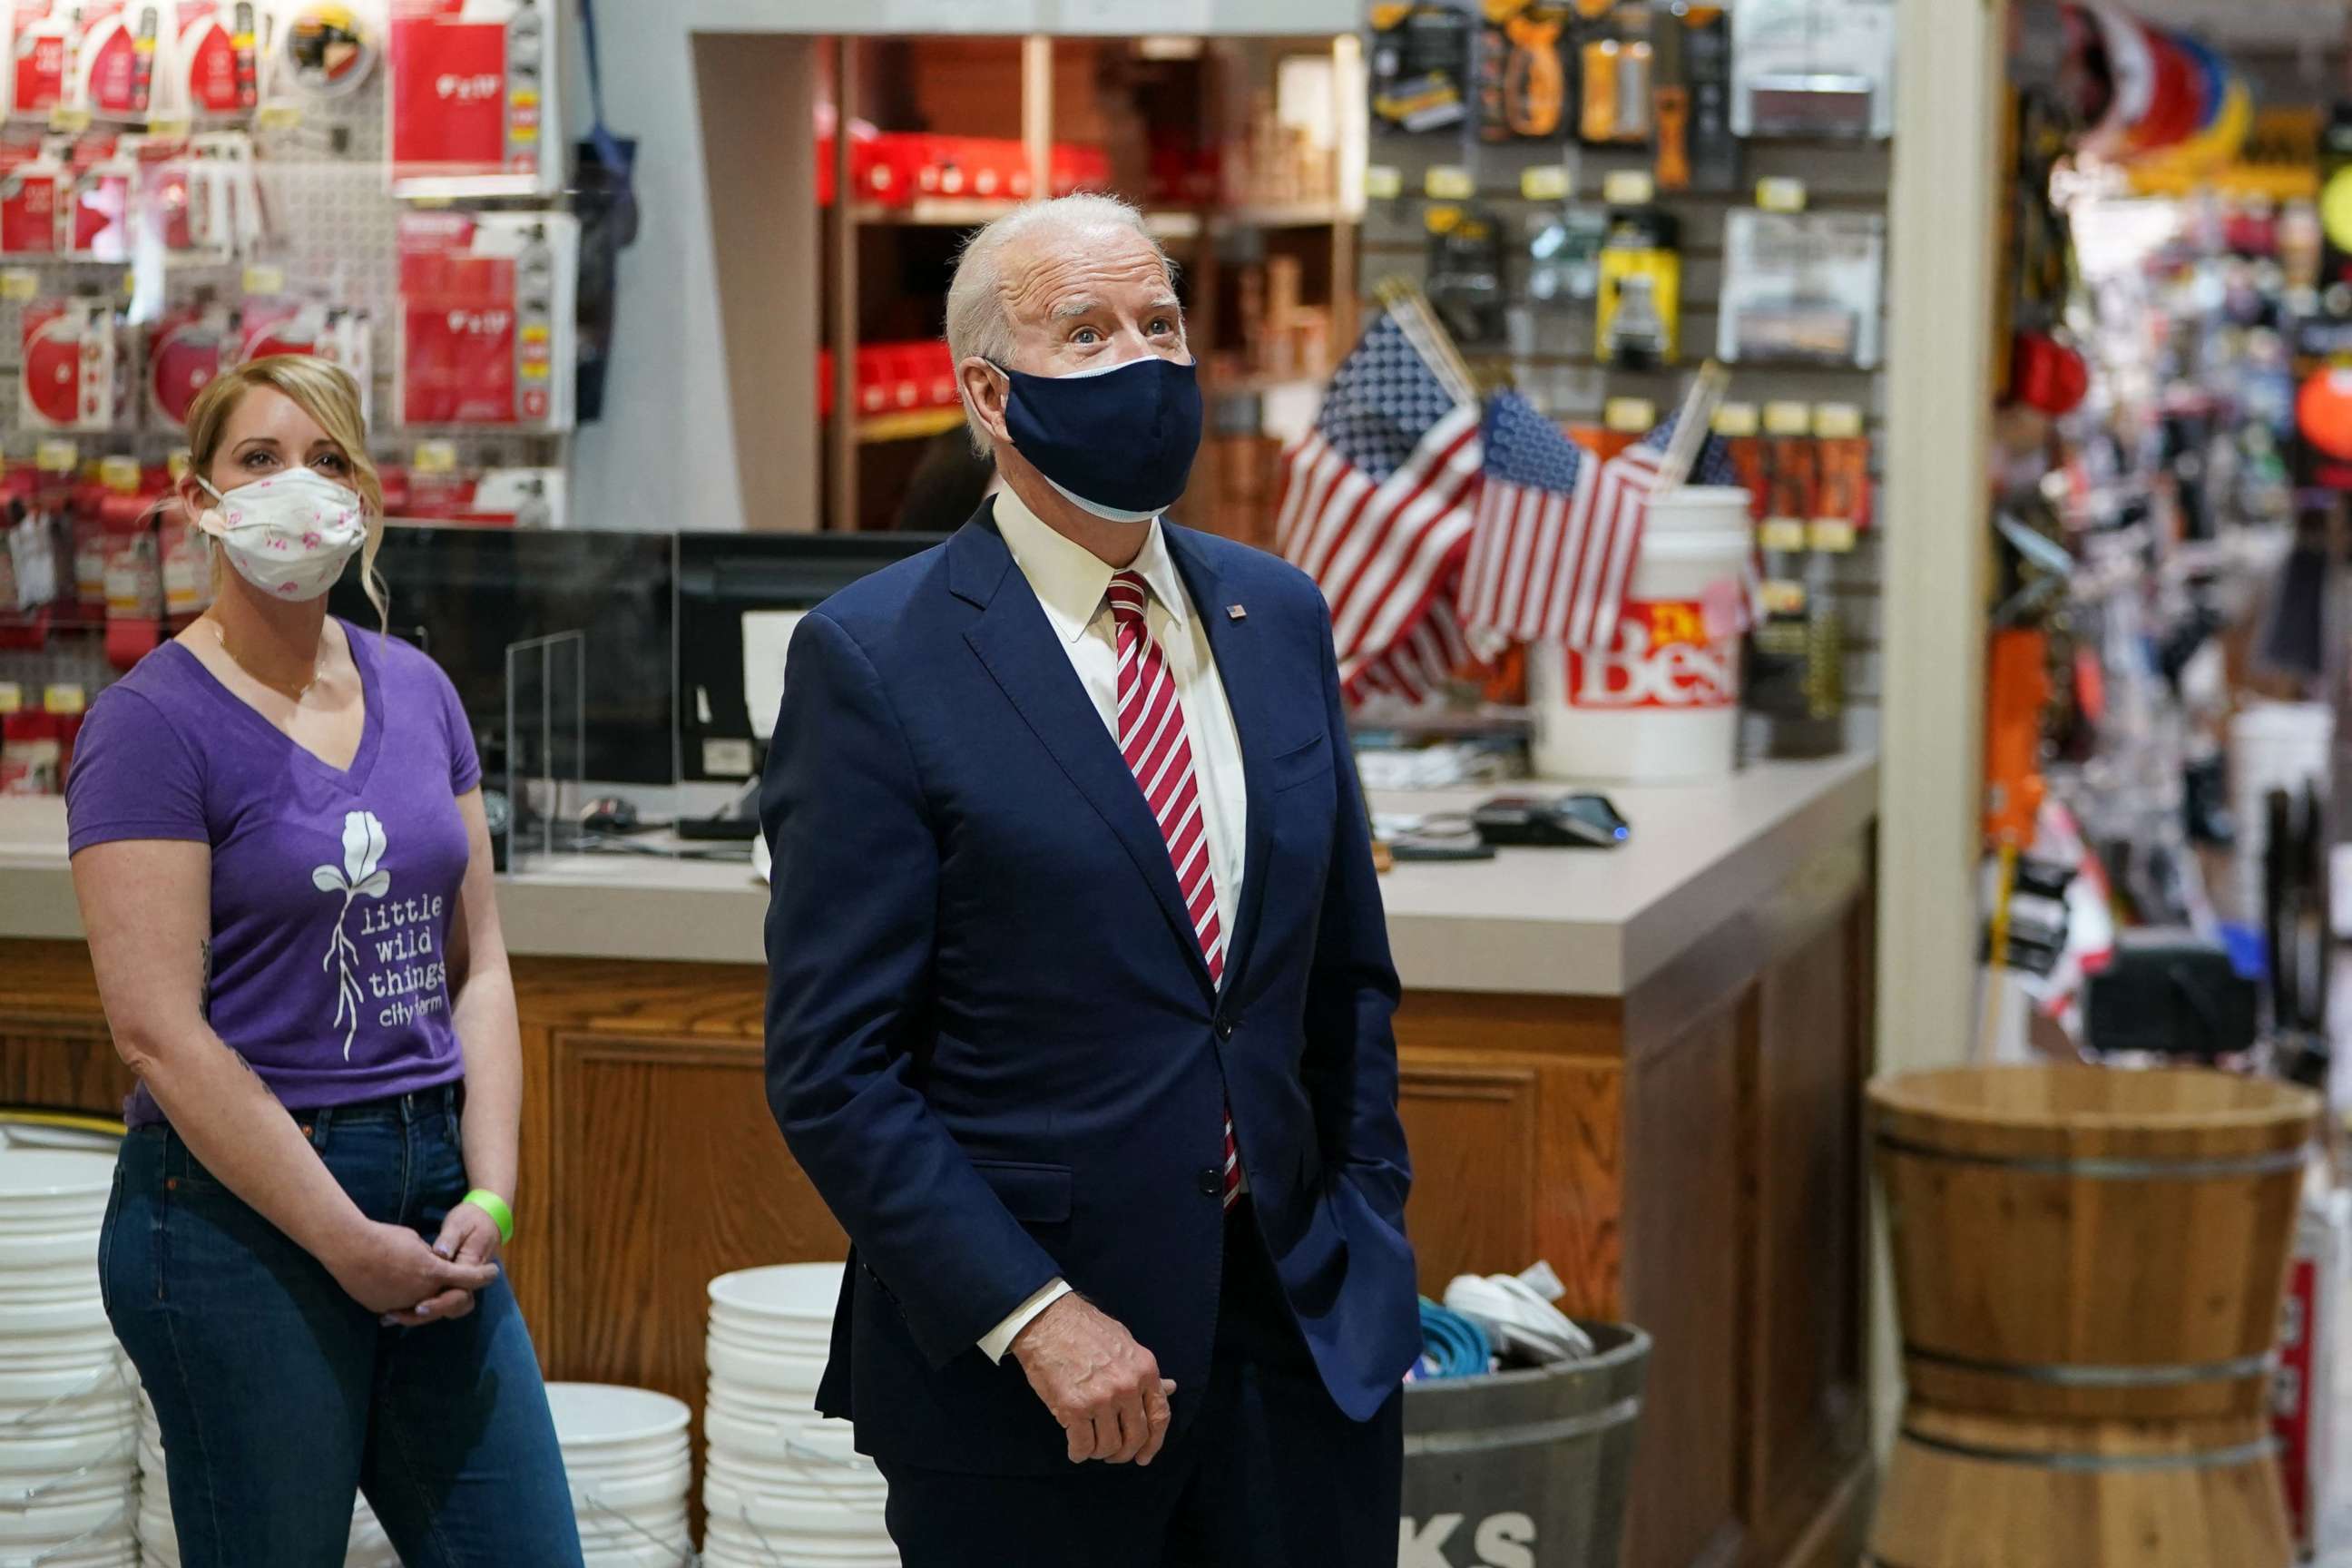 PHOTO: President Joe Biden stands with Mary Anna Ackley inside W.S. Jenks & Son, a hardware store in Washington, D.C, March 9, 2021.